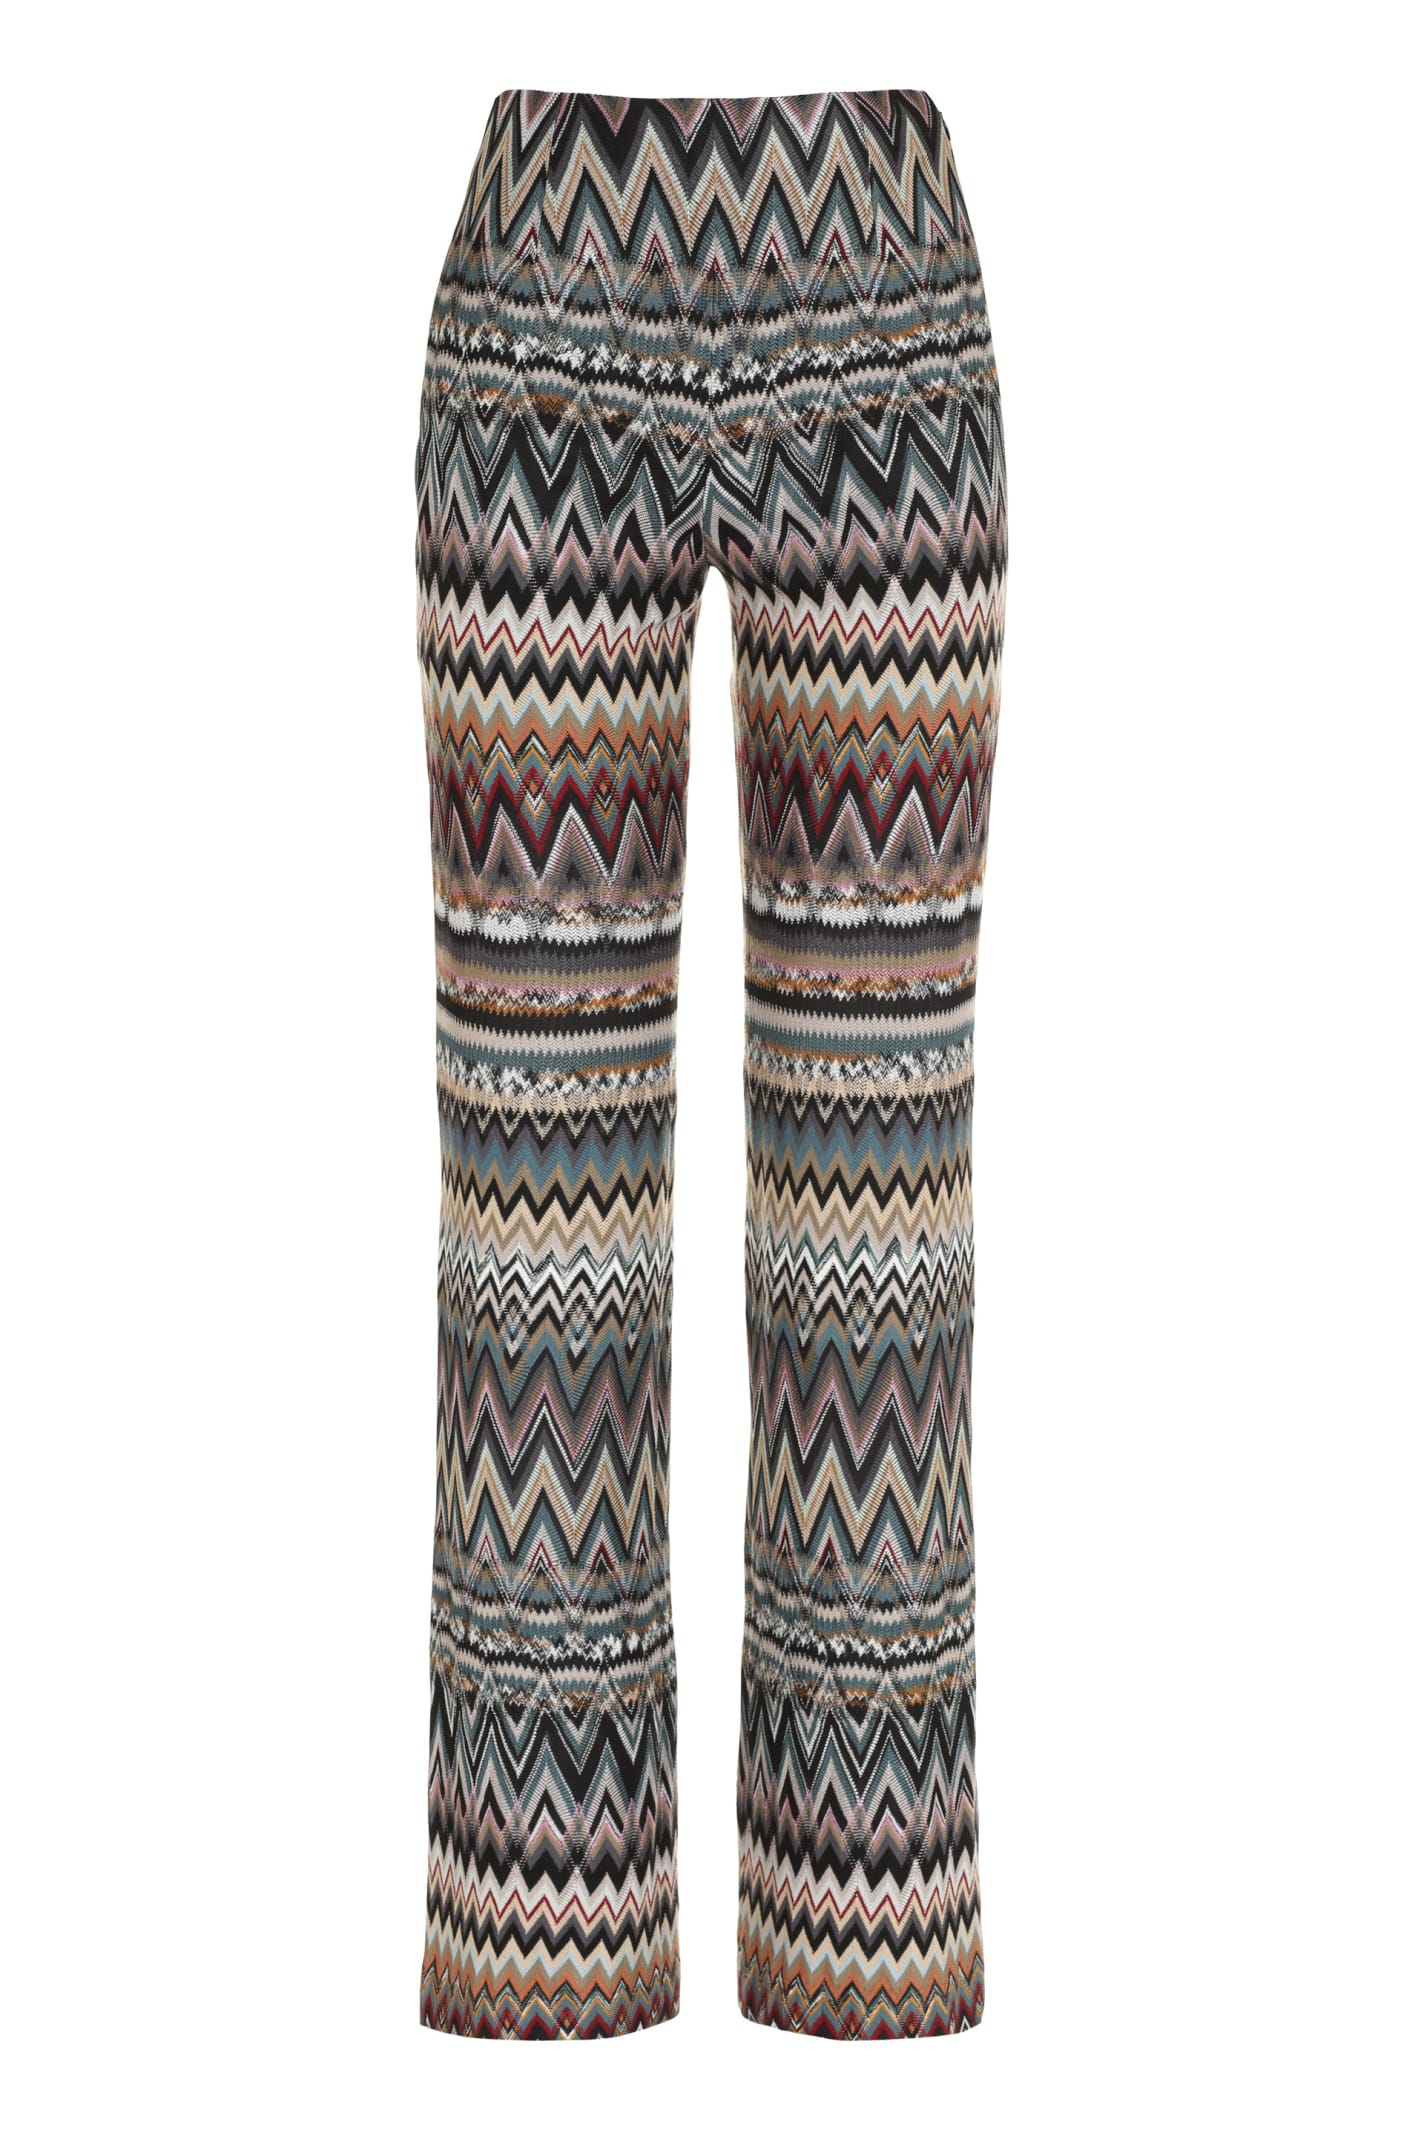 Missoni Chevron Knitted Palazzo Trousers In Multicoloured